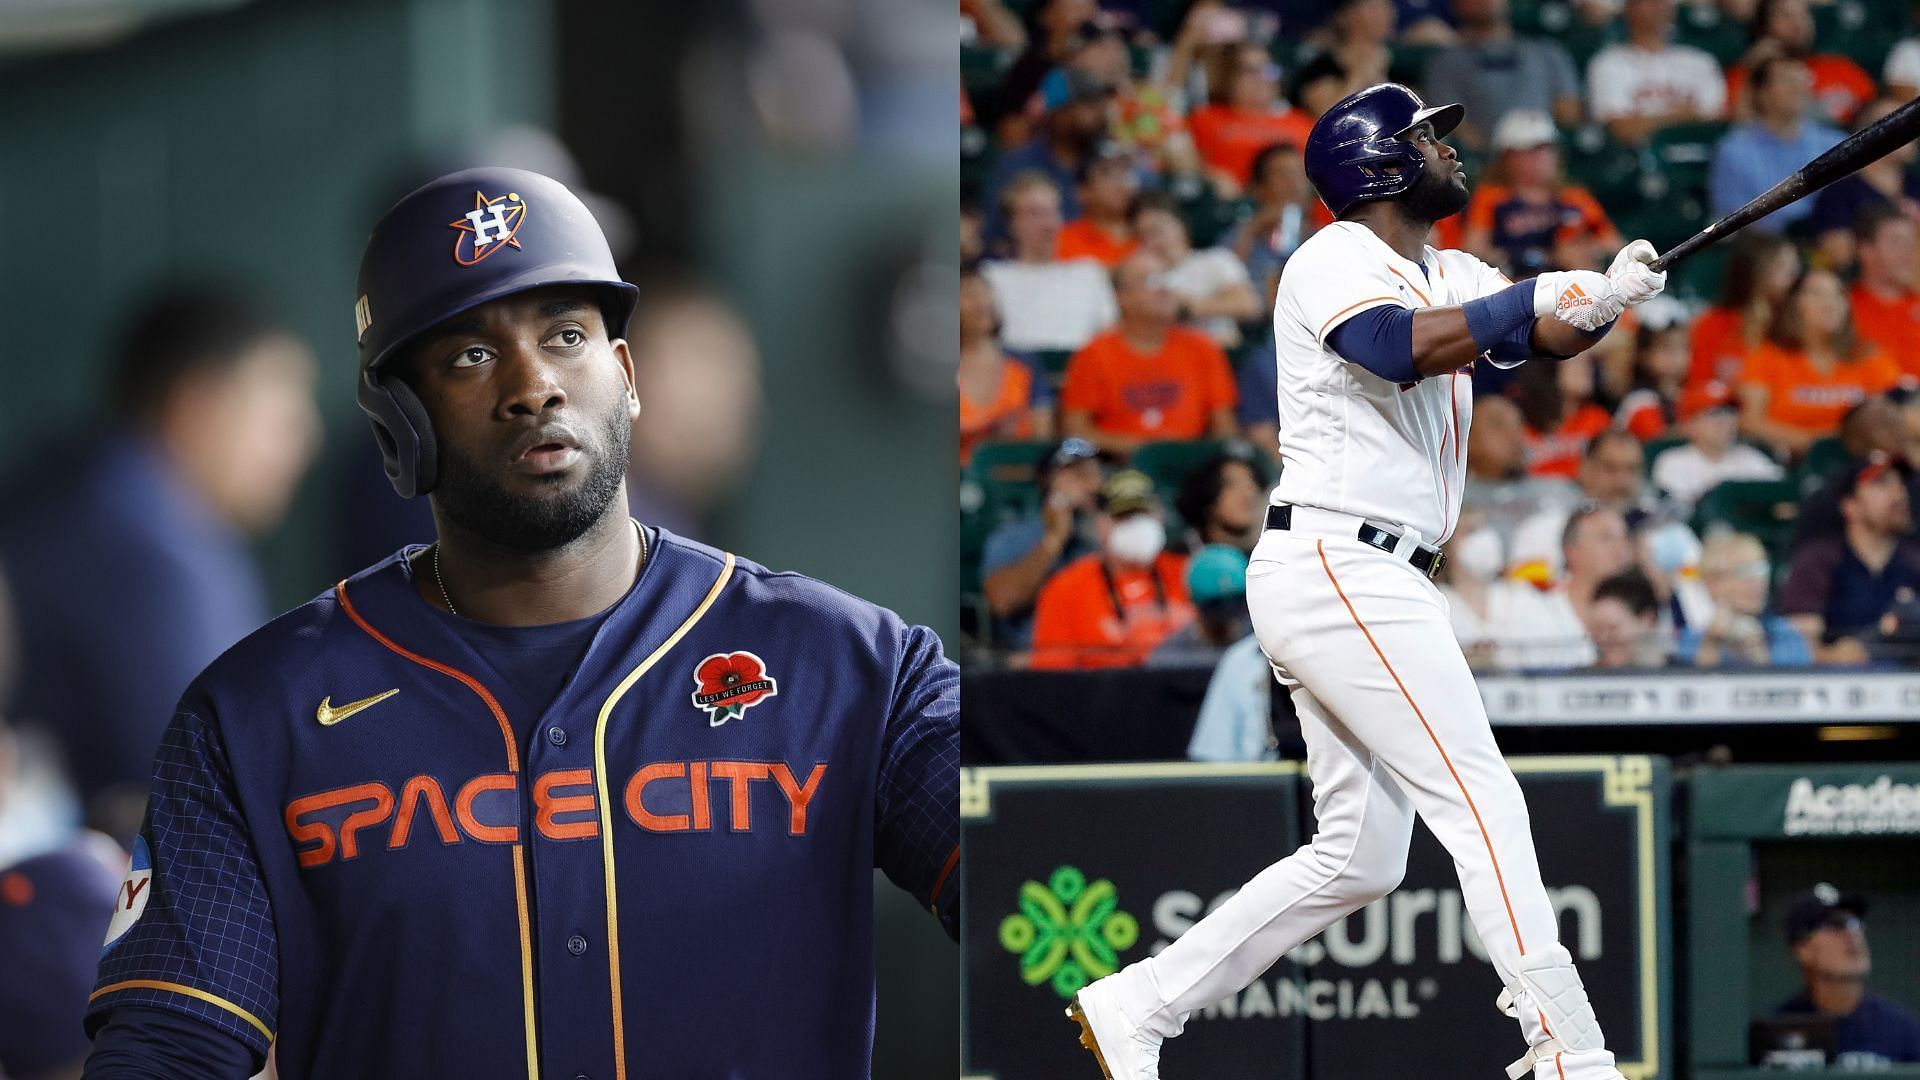 MLB - Staying in Space City. Yordan Alvarez and the